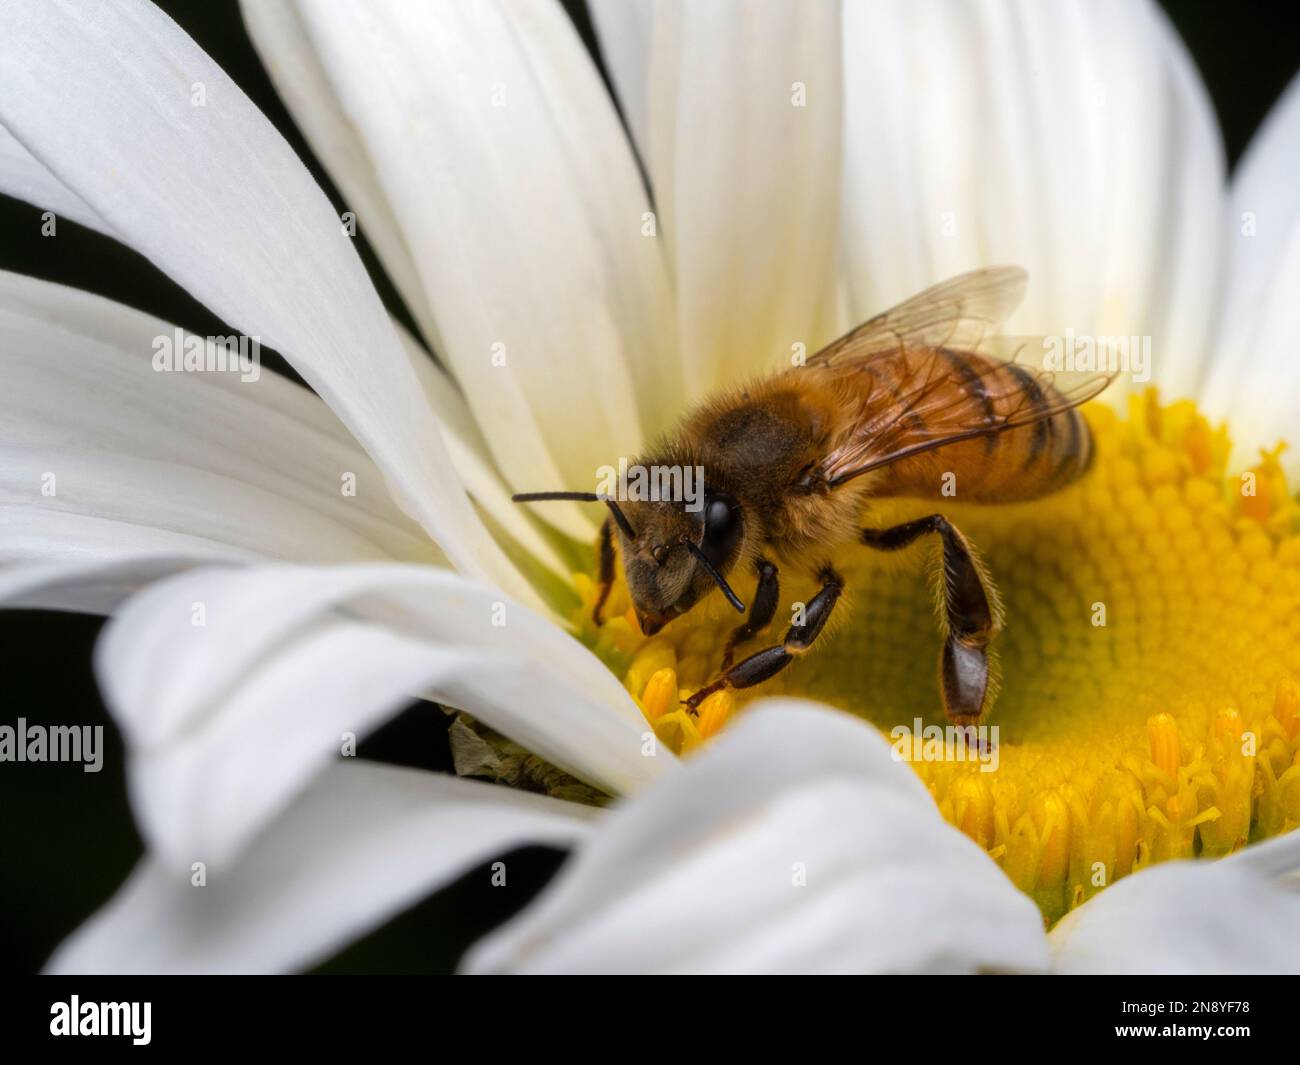 Side view of a domesticated European honey bee (Apis mellifera) exploring and collecting pollen from a yellow and white daisy flower Stock Photo